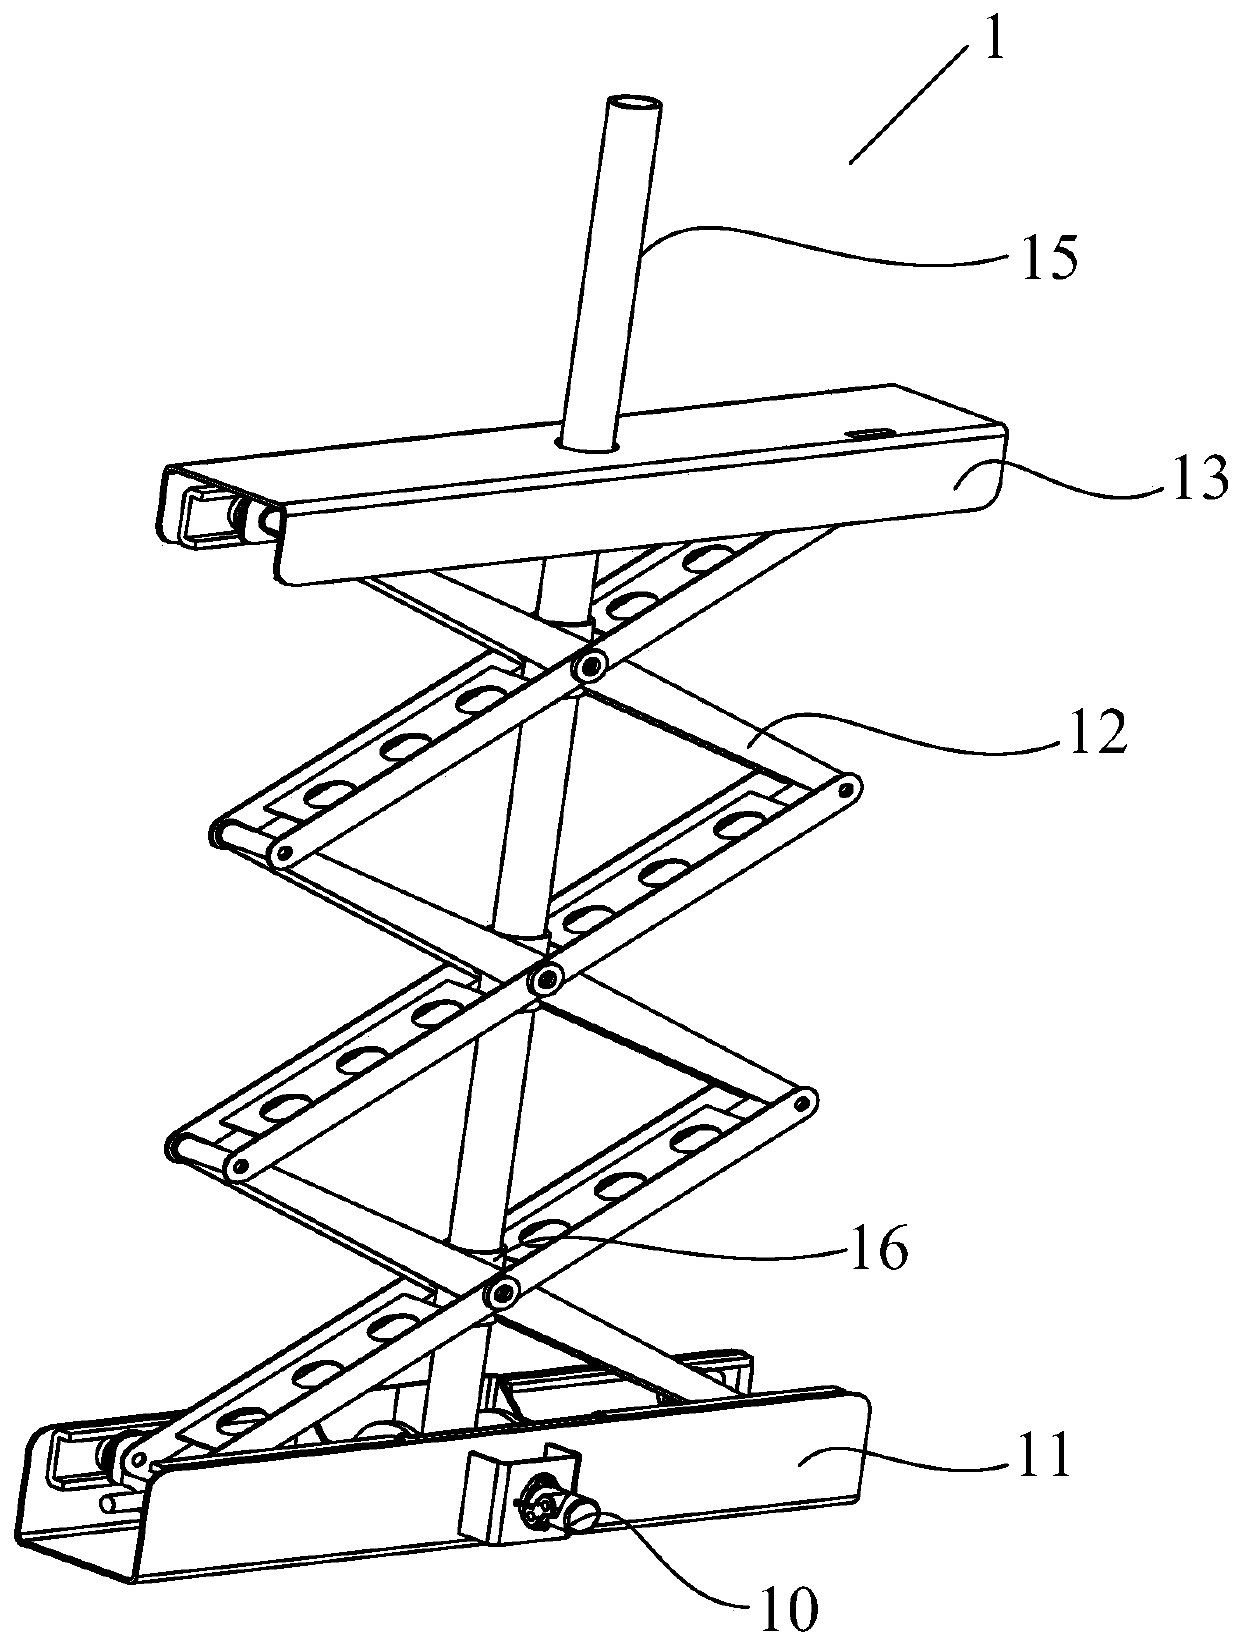 Lifting device and well repair platform